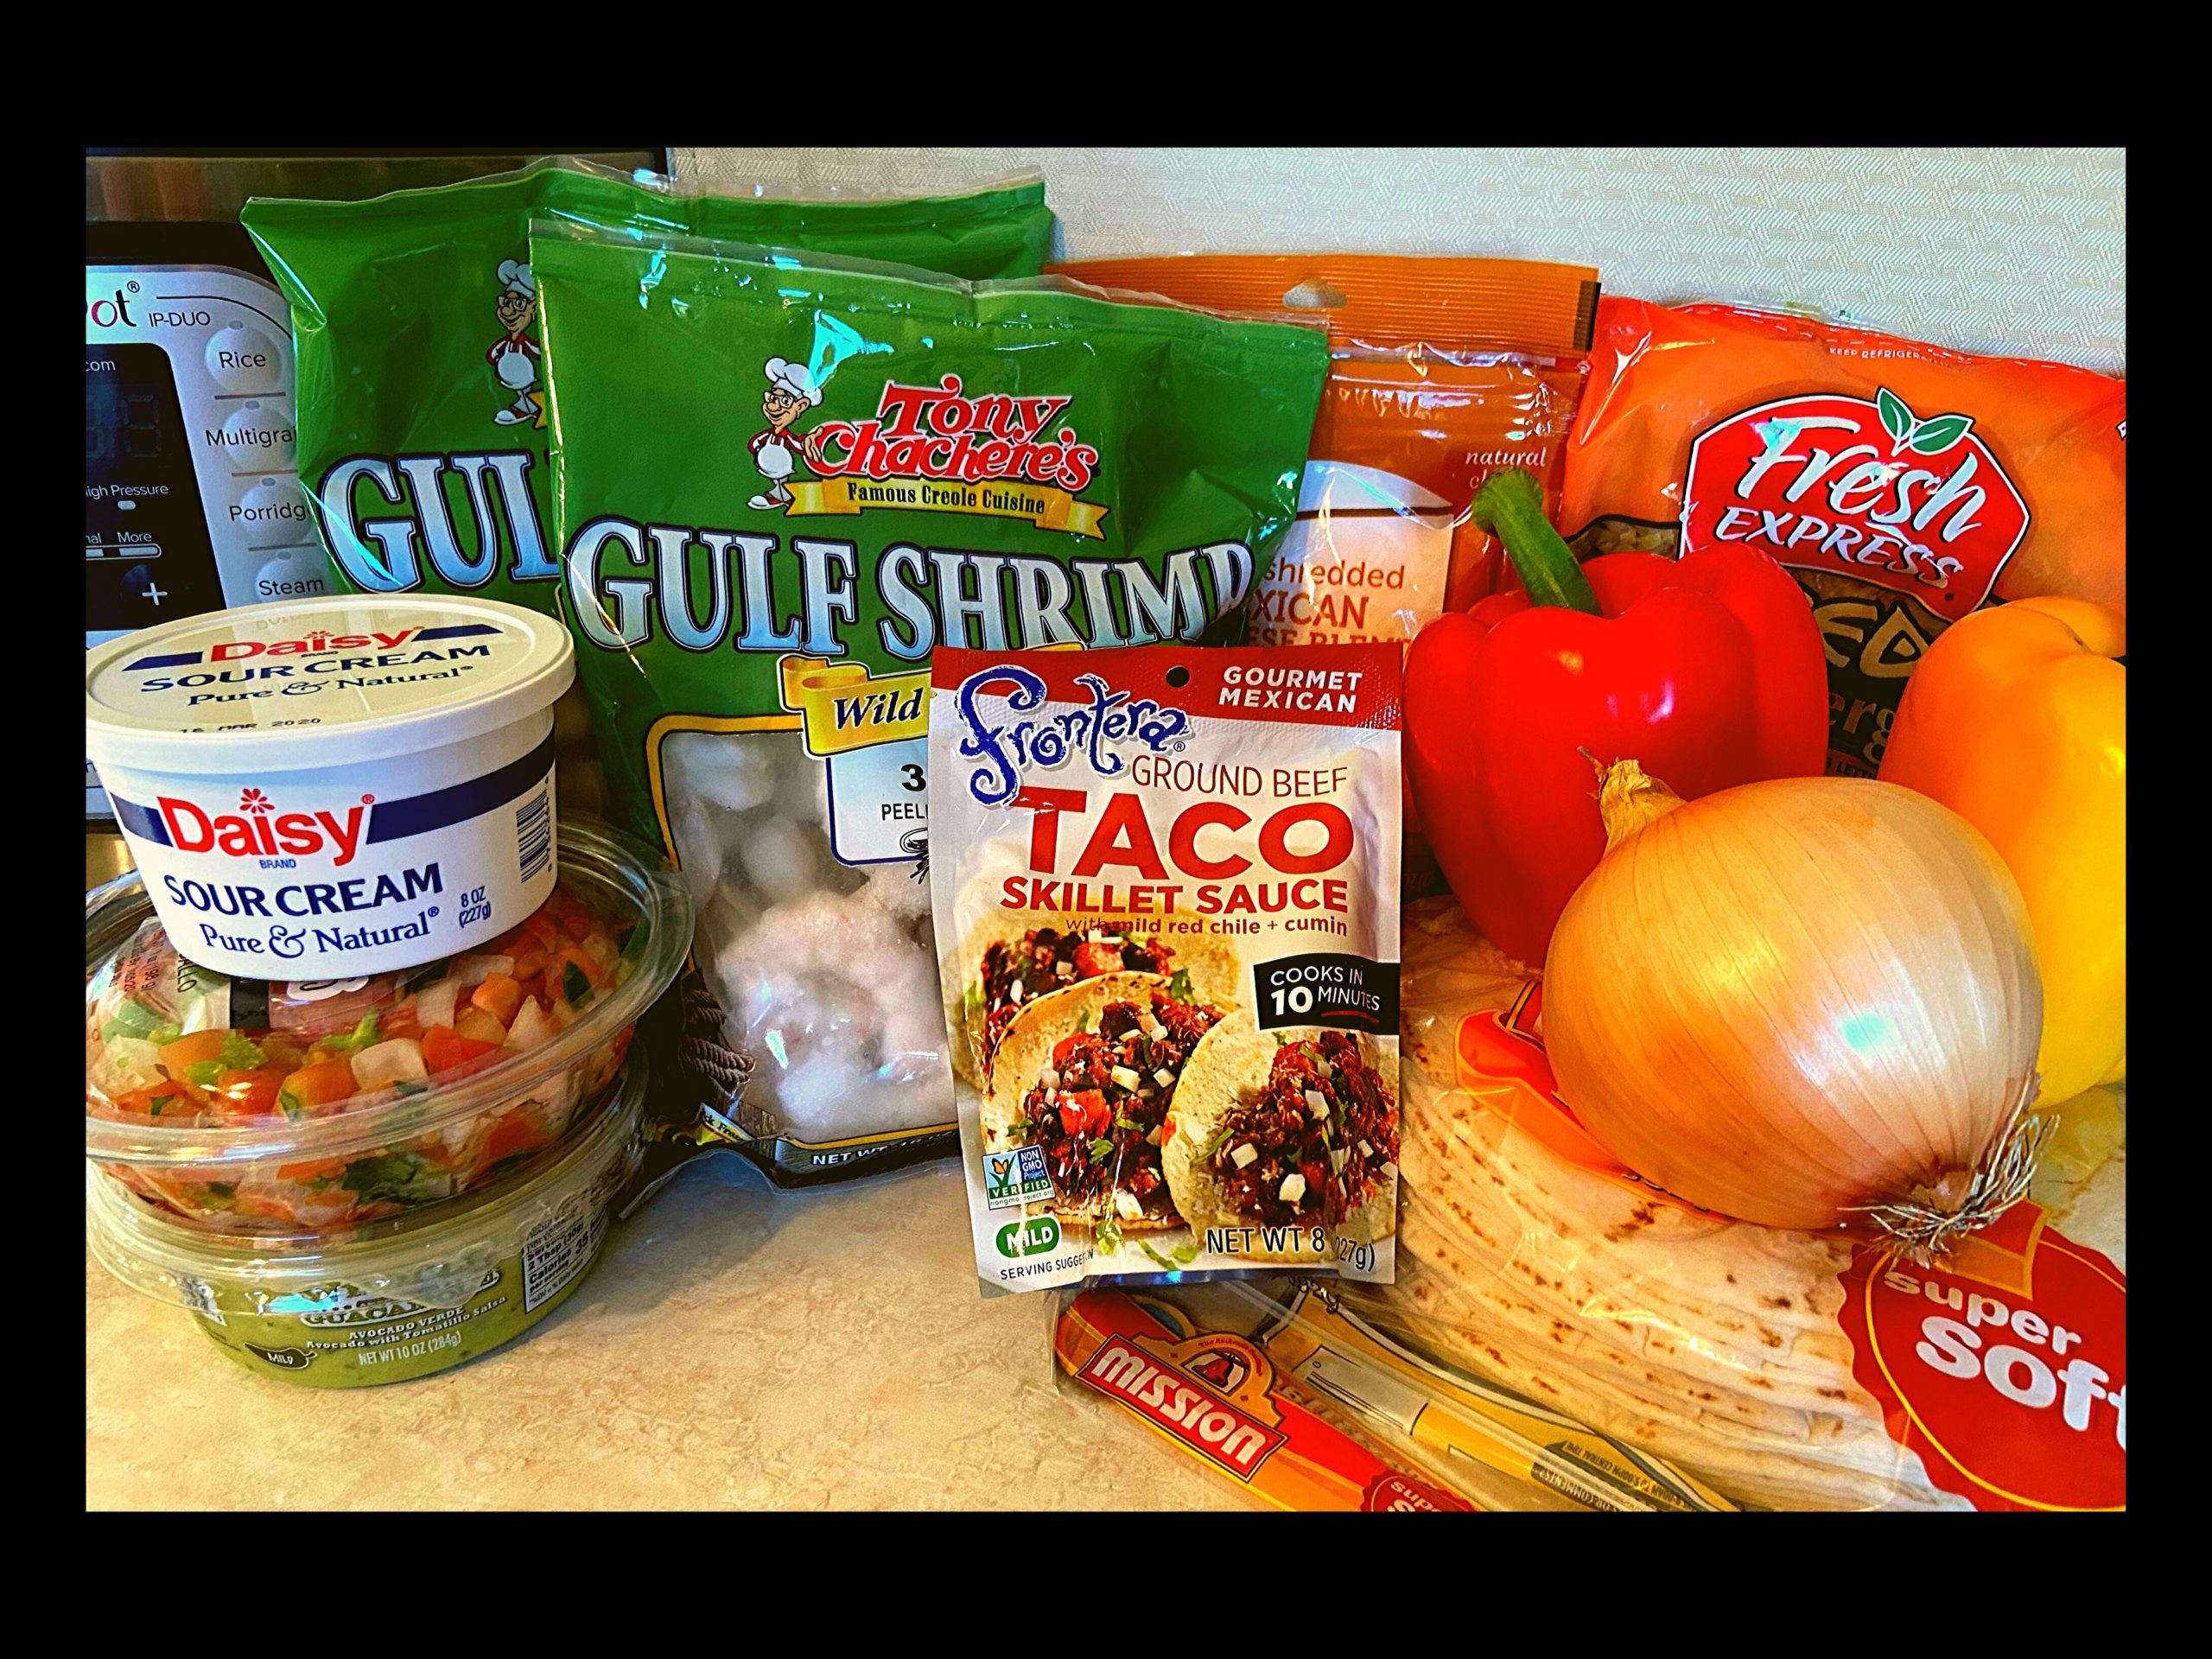 Two bags of large frozen shrimp, container of guacamole, container of sour cream, container of pico de gallo, bag of shredded cheese, pakcket of Frontera Taco Seasoning, red bell pepper, yellow bell pepper, a whole onion, a bag of tortillas, and a bag of shredded lettuce all resting on a kitchen counter top in front of an Instant Pot.l 